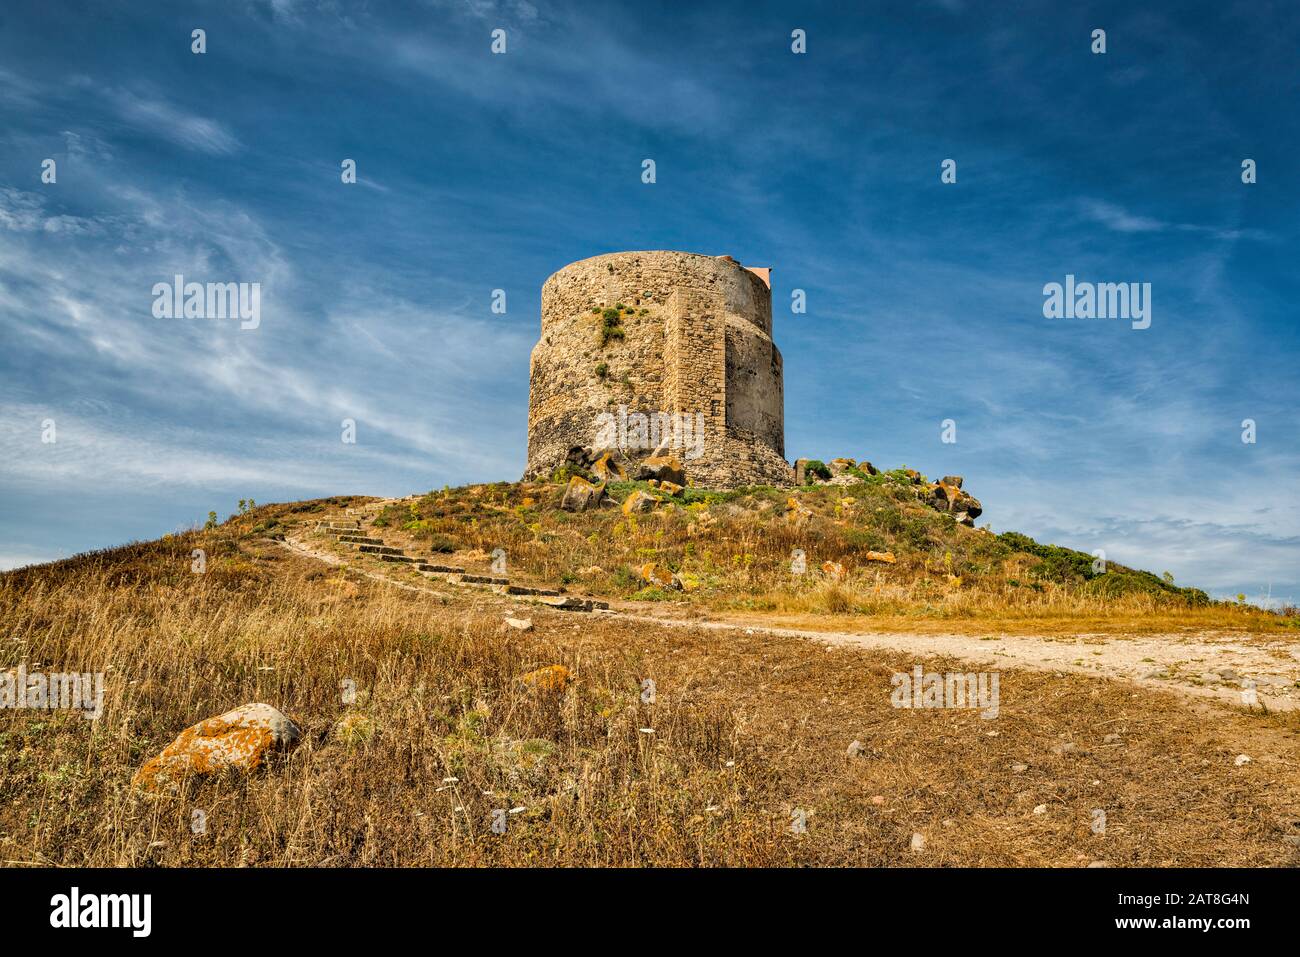 Torre di San Giovanni, 16th century, watchtower at Archaeological Site of Tharros, Sardinia, Italy Stock Photo